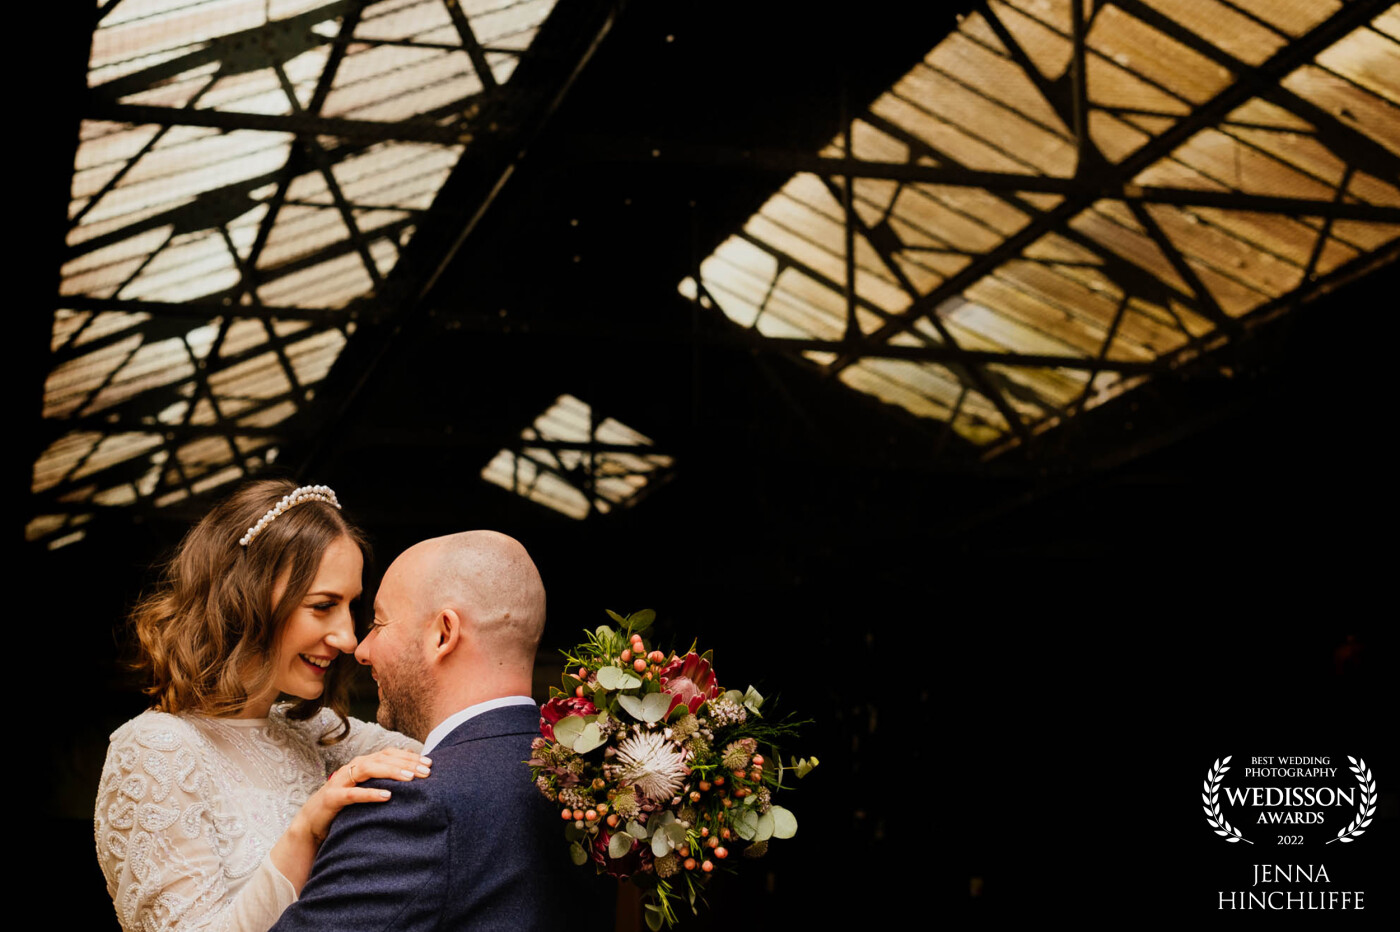 I wanted to make my couple pop against a dark background but still include the industrial features of the venue so I used the roof to add interest and draw your eye to the couple.